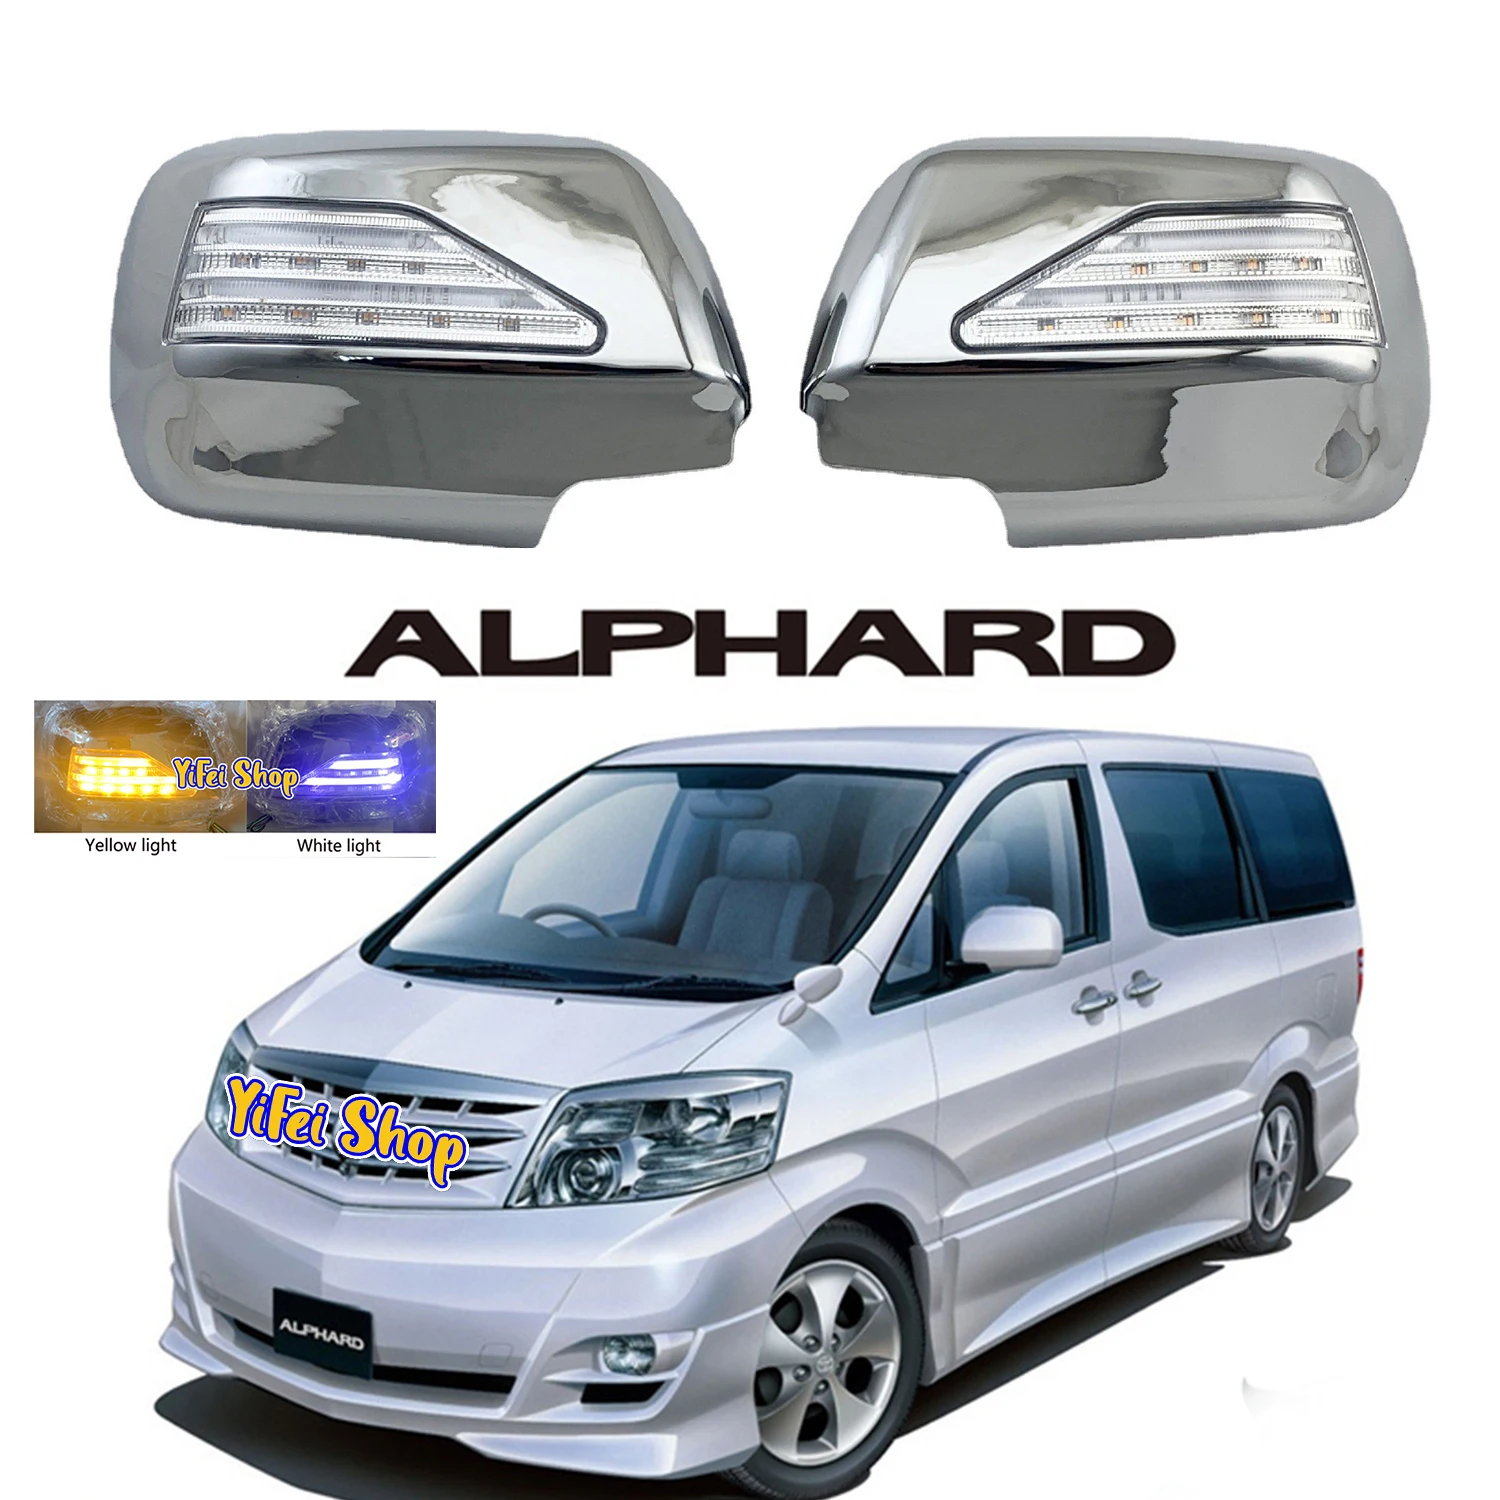 

1998 1999 2000 2003 For Toyota ALPHARD 3.0 MZ-G 2pc Novel Style Car Chrome Accessories Plated Trim Door Mirror Cover With LED